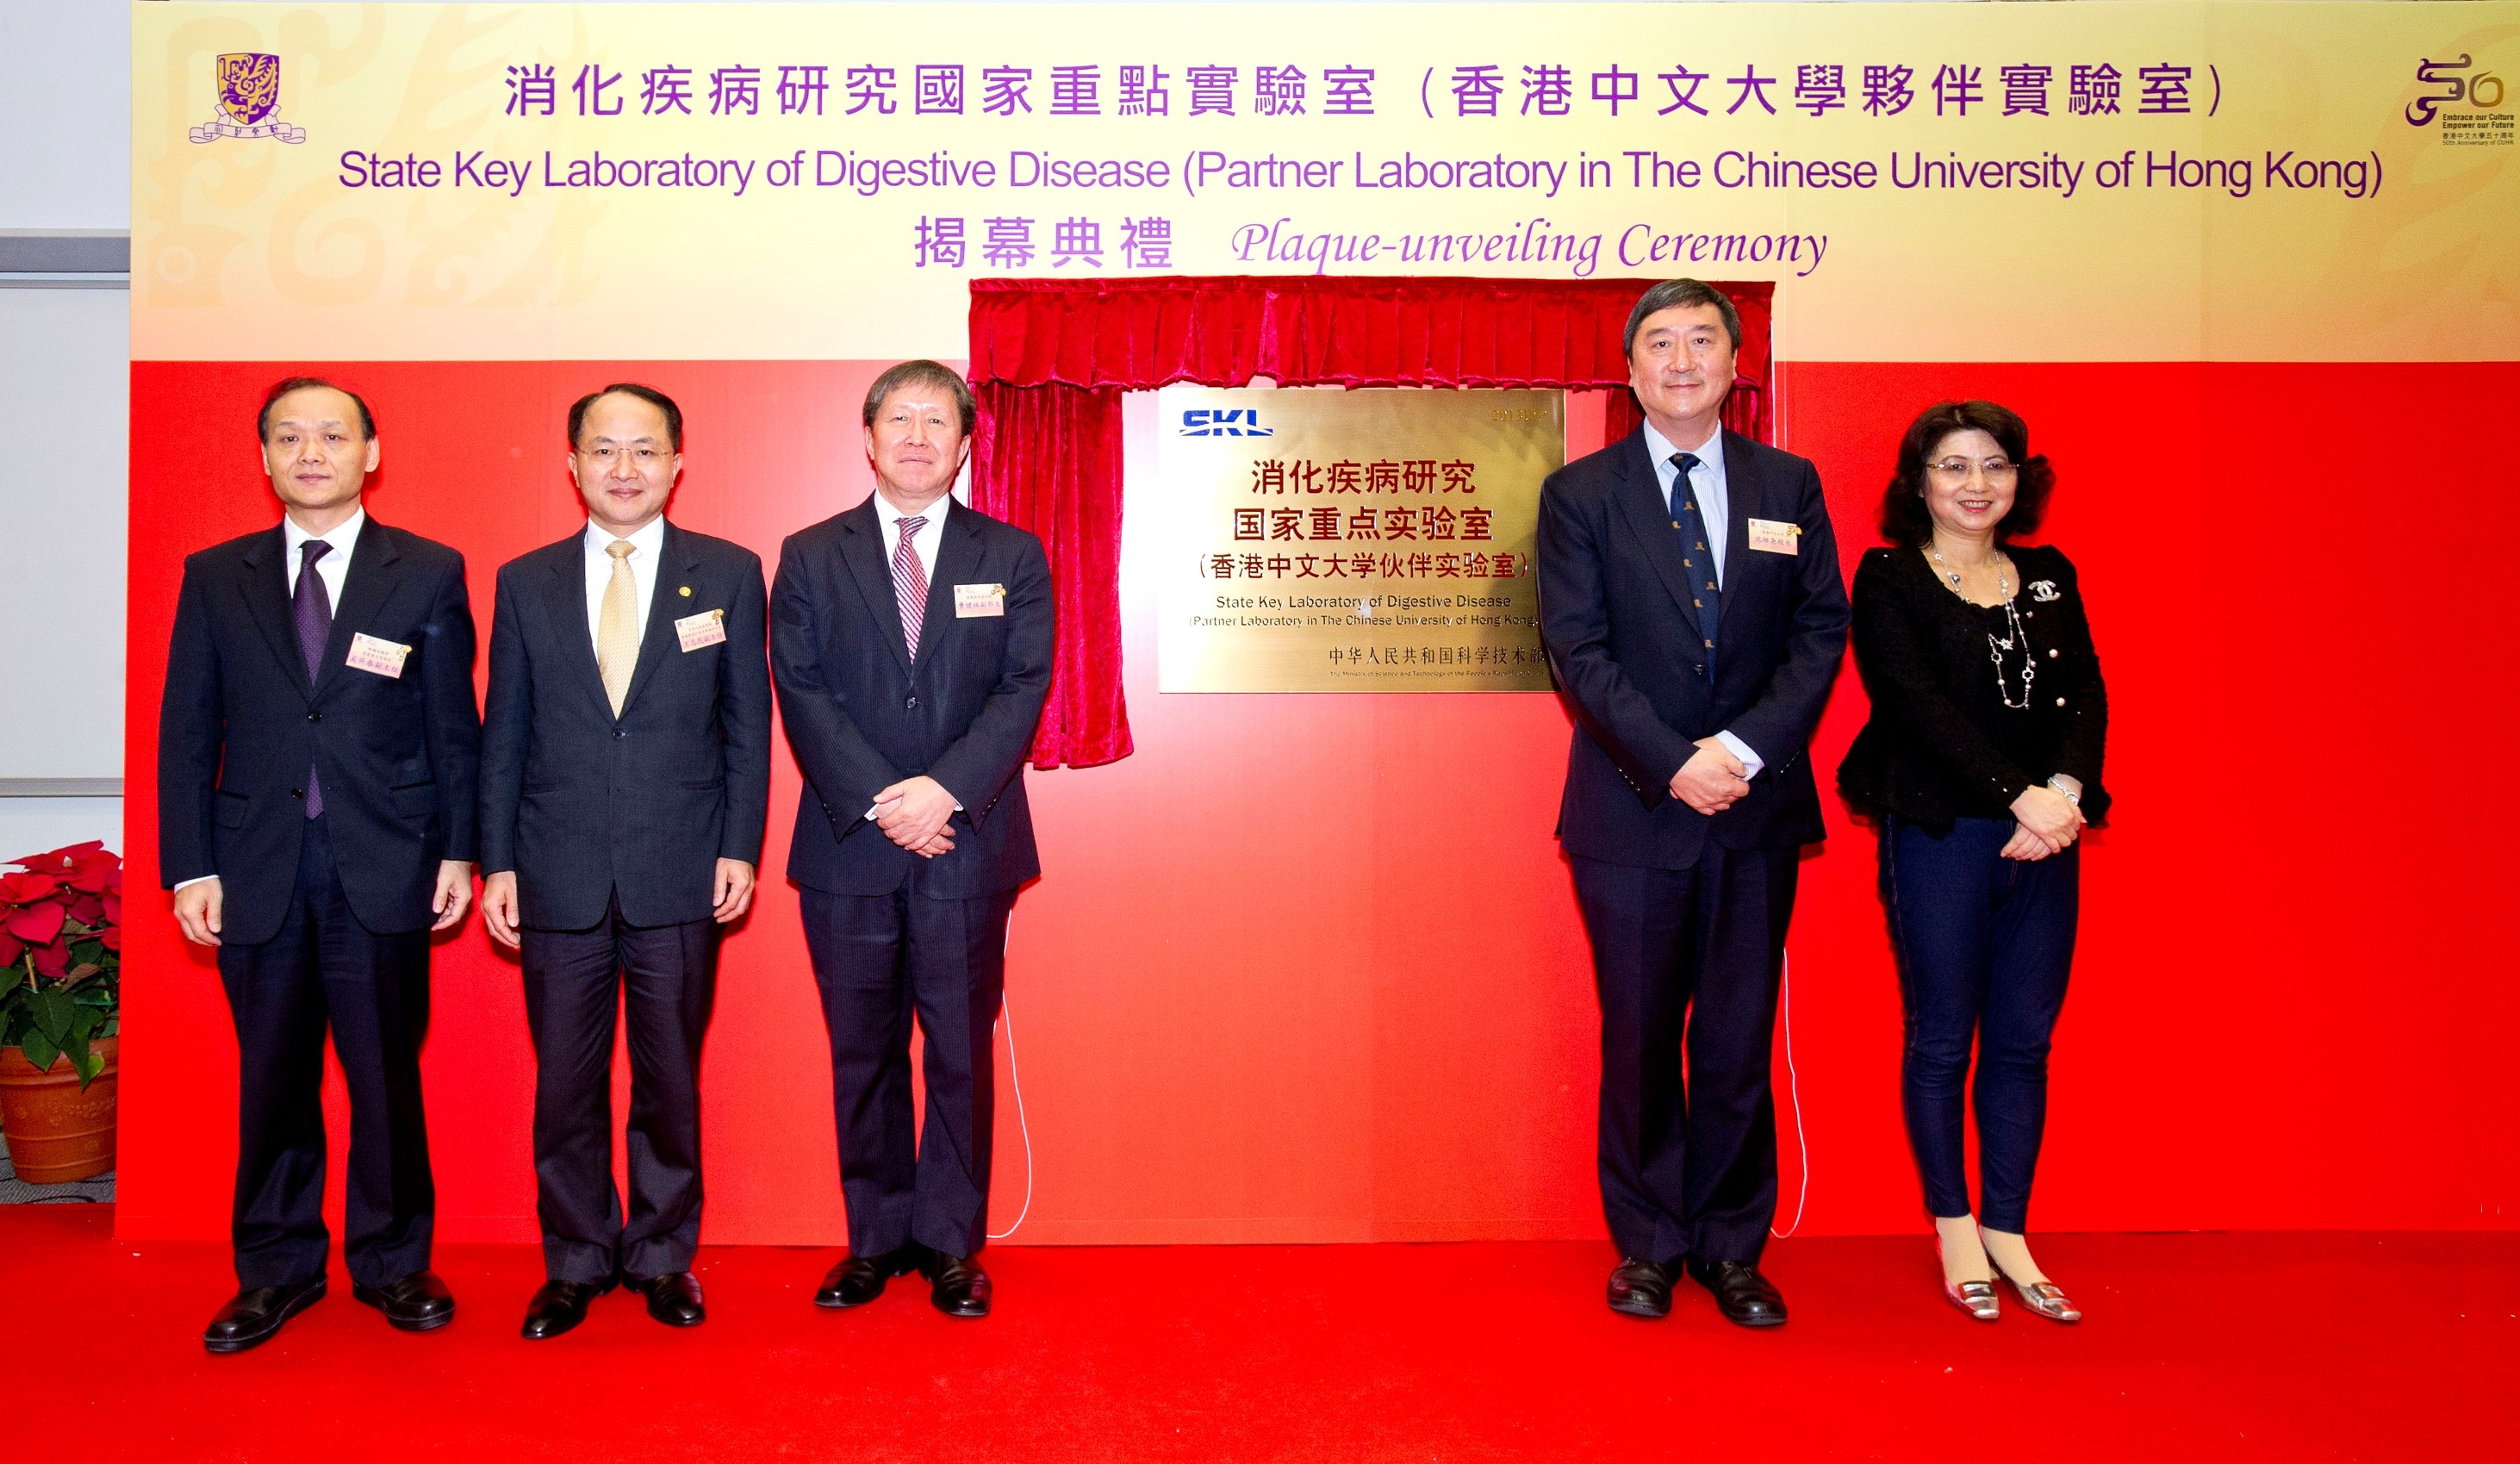 The officiating guests unveil the plaque for the State Key Laboratory of Digestive Disease (Partner Laboratory in The Chinese University of Hong Kong). (From left) Prof. Wu Kaichun, Deputy Director of State Key Laboratory of Cancer Biology; Mr. Wang Zhi-min, Deputy Director of the Liaison Office of the Central People's Government in HKSAR; Prof. Cao Jianlin, Vice Minister of Science and Technology of the People’s Republic of China; Prof. Joseph Sung, Vice-Chancellor and President of CUHK; and Miss Janet Wong, Commissioner for Innovation and Technology.